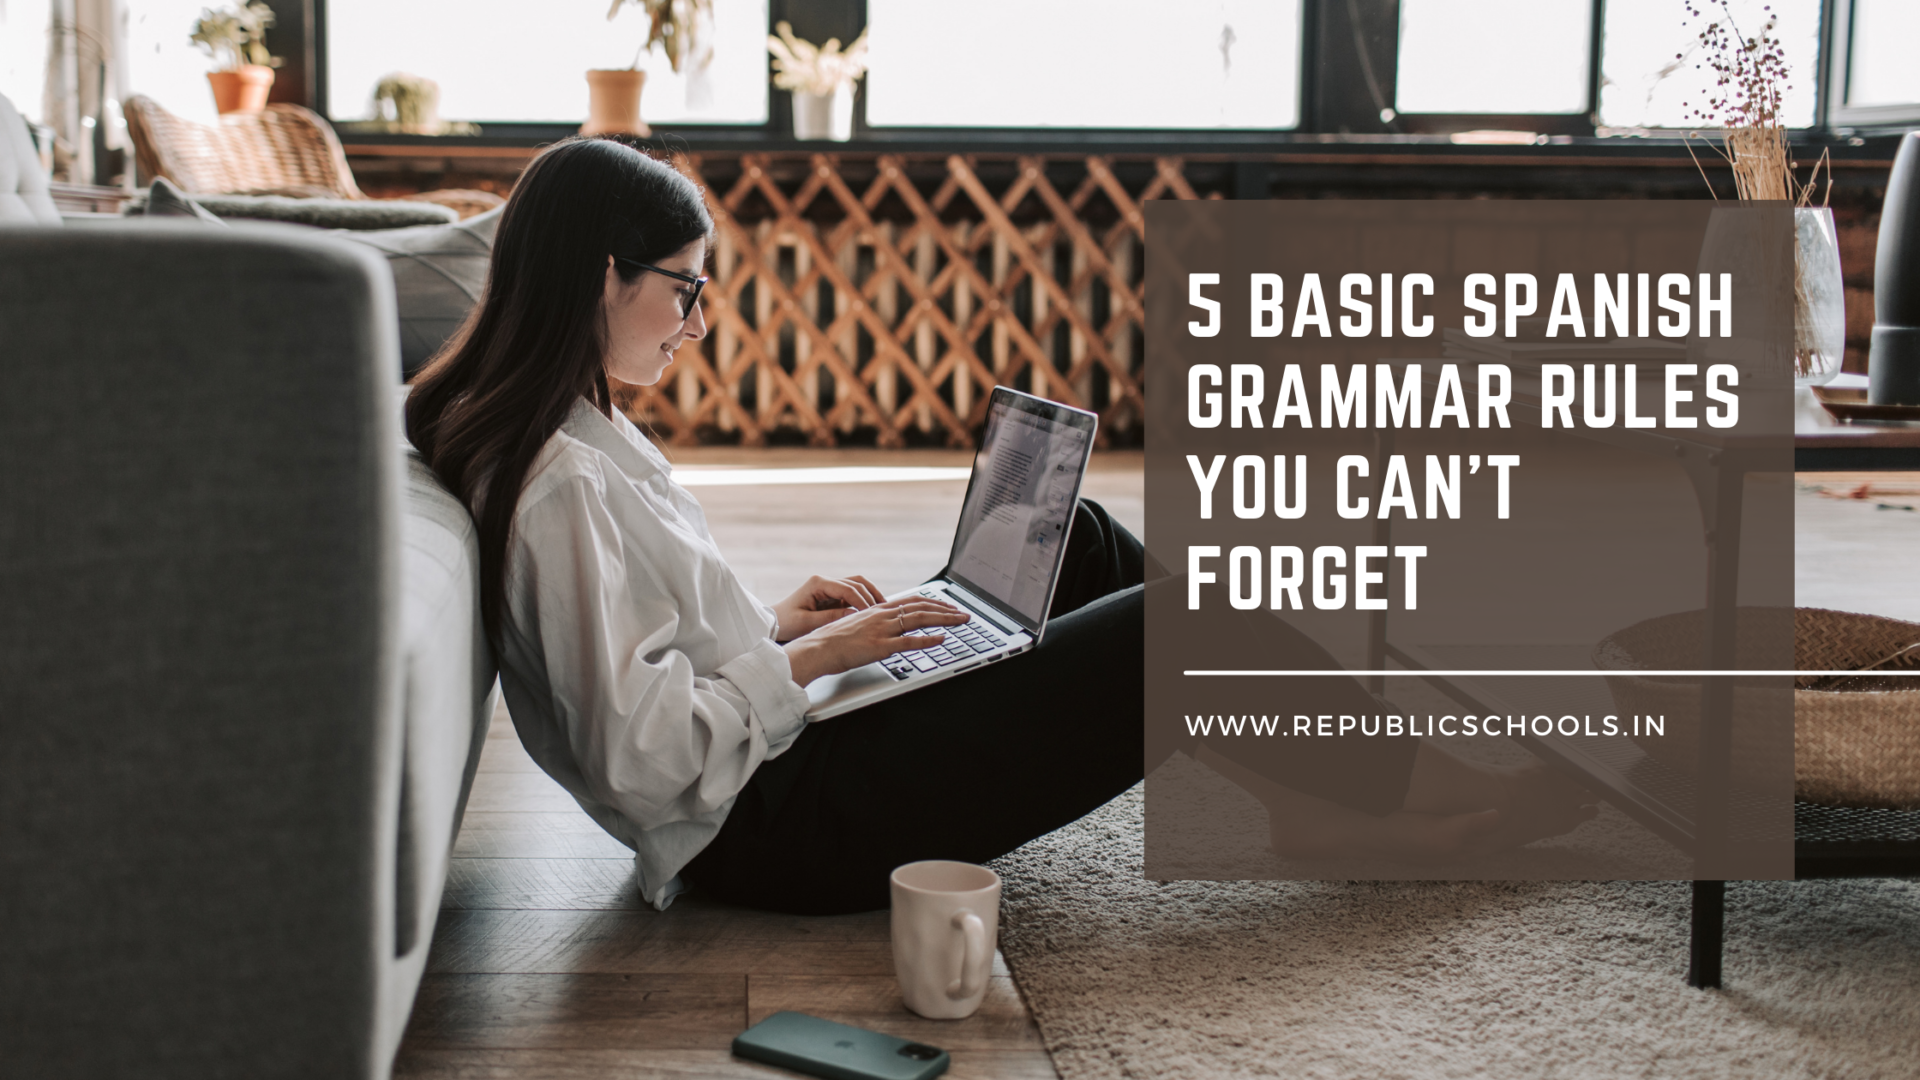 5 Basic Spanish Grammar Rules You Can’t Forget